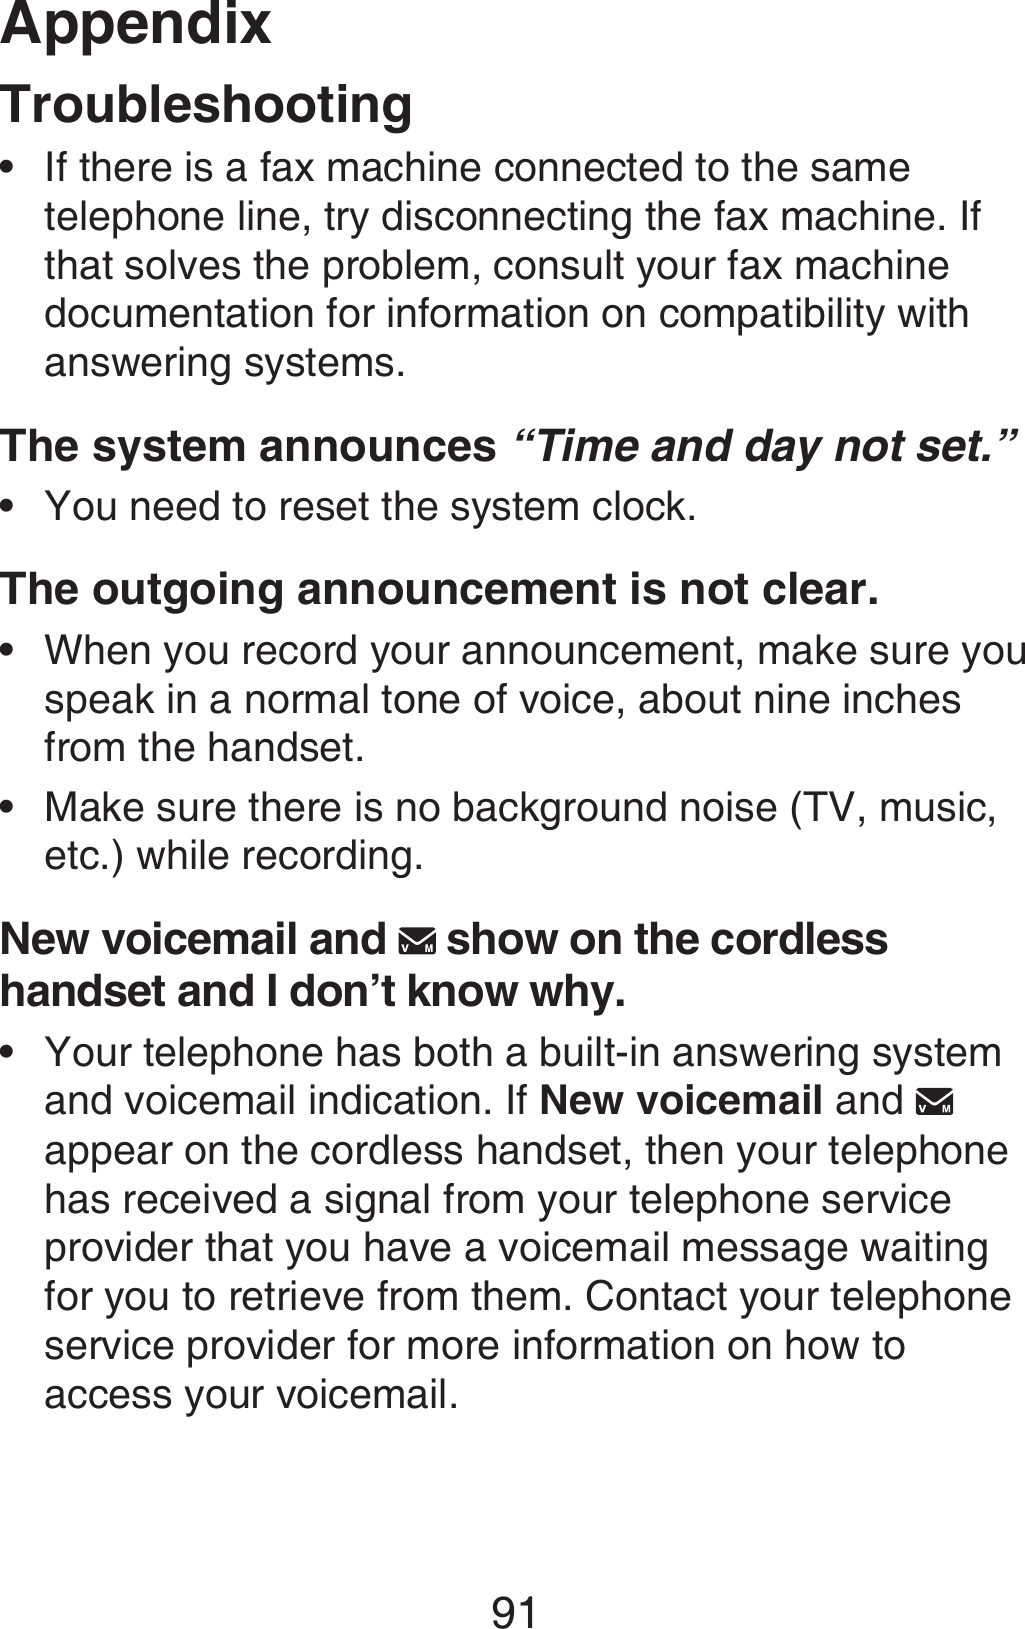 Appendix91TroubleshootingIf there is a fax machine connected to the same telephone line, try disconnecting the fax machine. If that solves the problem, consult your fax machine documentation for information on compatibility with answering systems.The system announces “Time and day not set.”You need to reset the system clock.The outgoing announcement is not clear.When you record your announcement, make sure you speak in a normal tone of voice, about nine inches from the handset.Make sure there is no background noise (TV, music, etc.) while recording.New voicemail and   show on the cordless handset and I don’t know why.Your telephone has both a built-in answering system and voicemail indication. If New voicemail and   appear on the cordless handset, then your telephone has received a signal from your telephone service provider that you have a voicemail message waiting for you to retrieve from them. Contact your telephone service provider for more information on how to access your voicemail.•••••